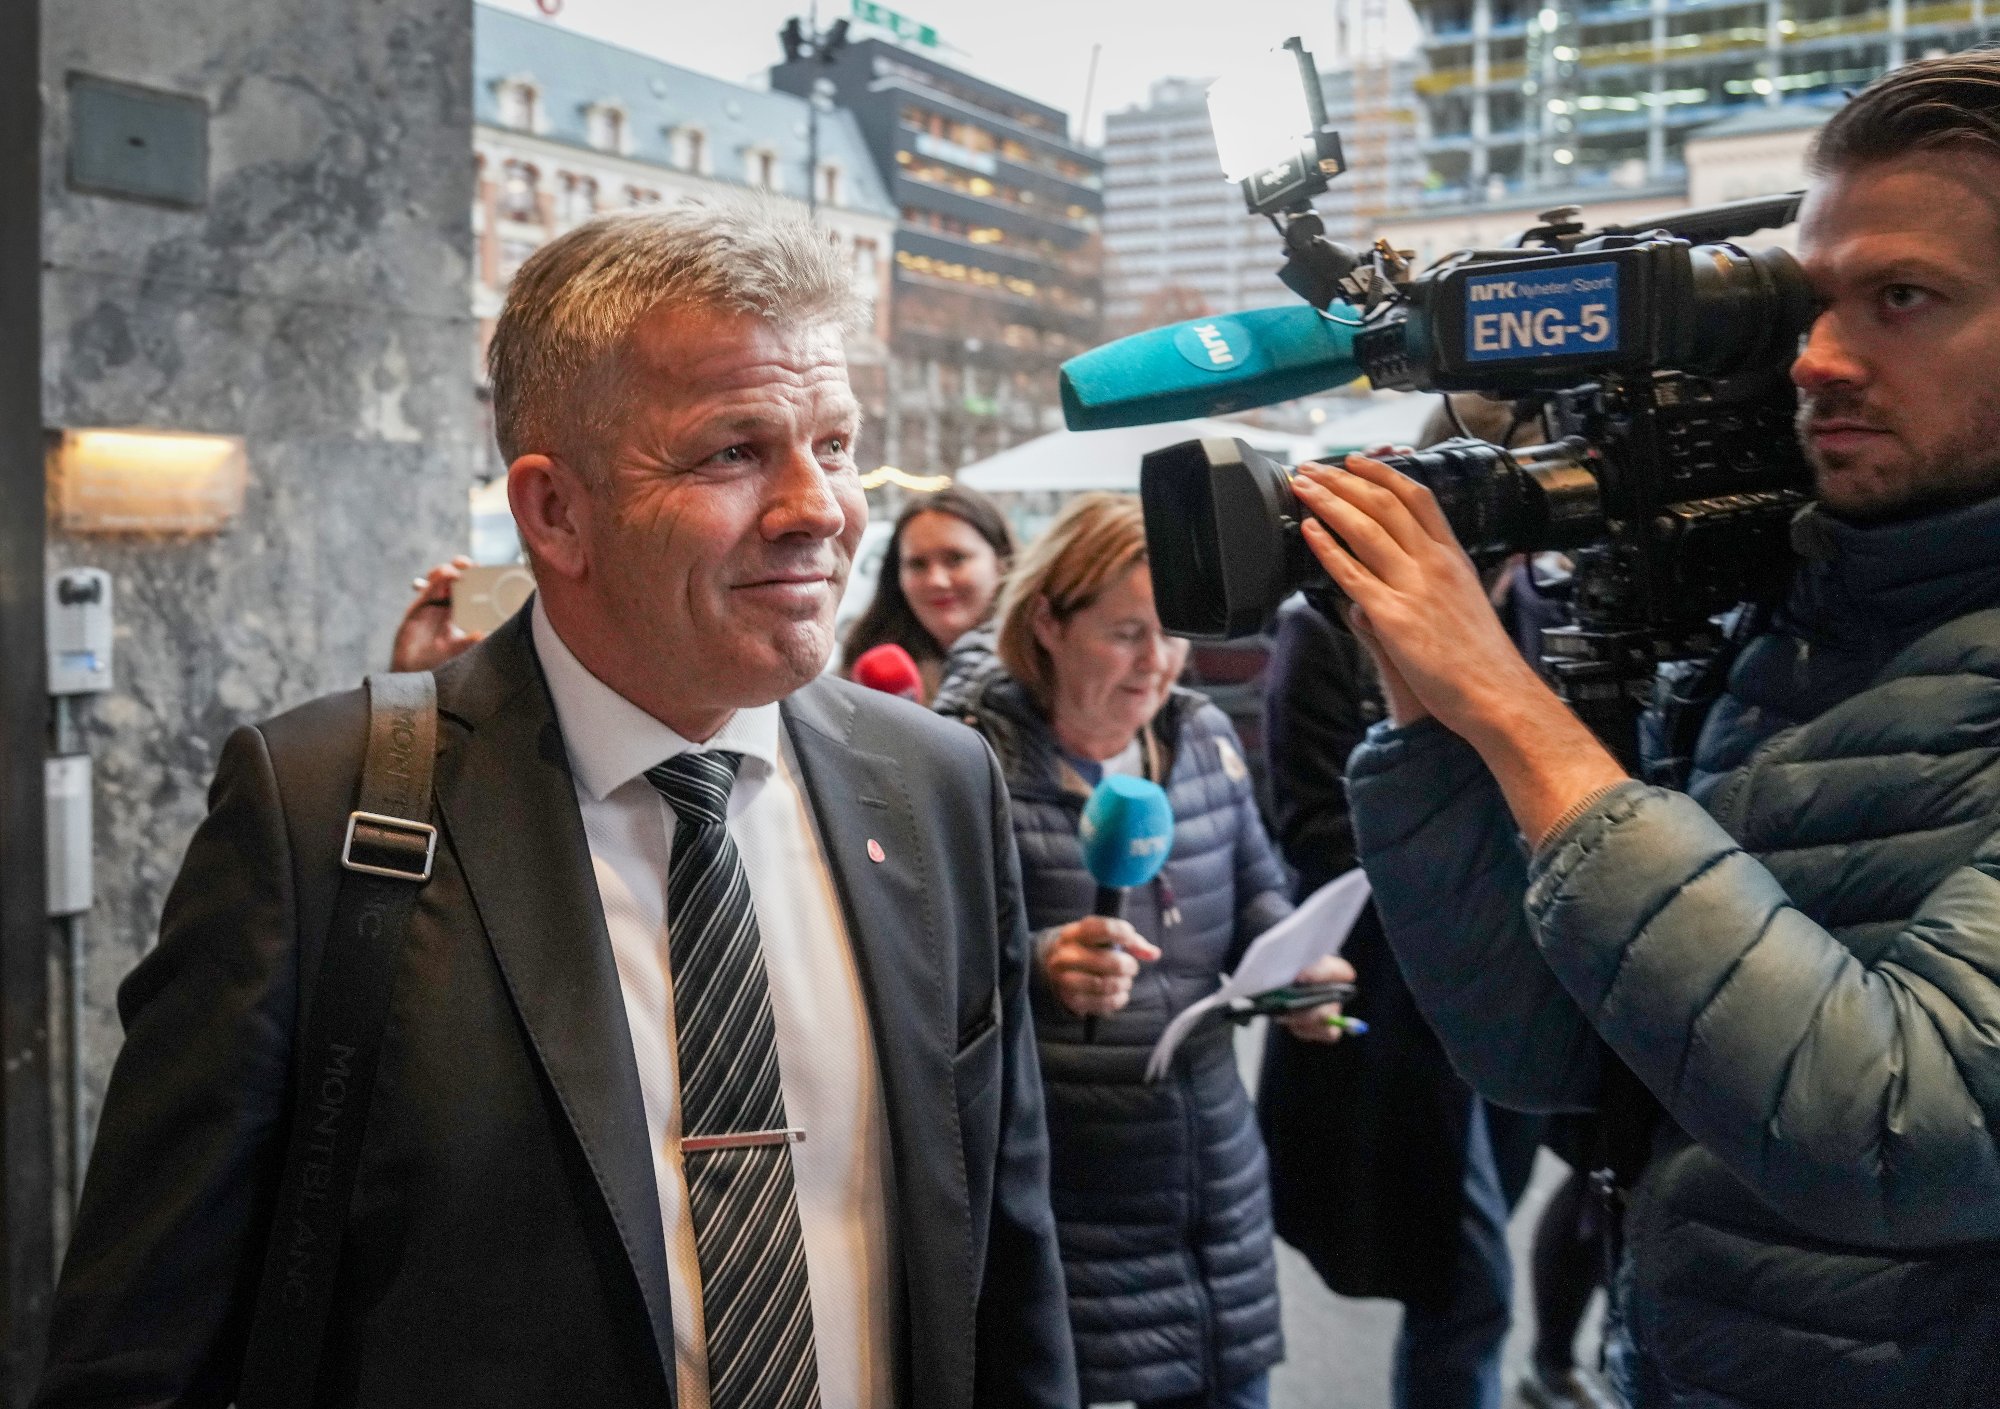 Norwegian Politics |  Ap on slide: - Of course room for modifications